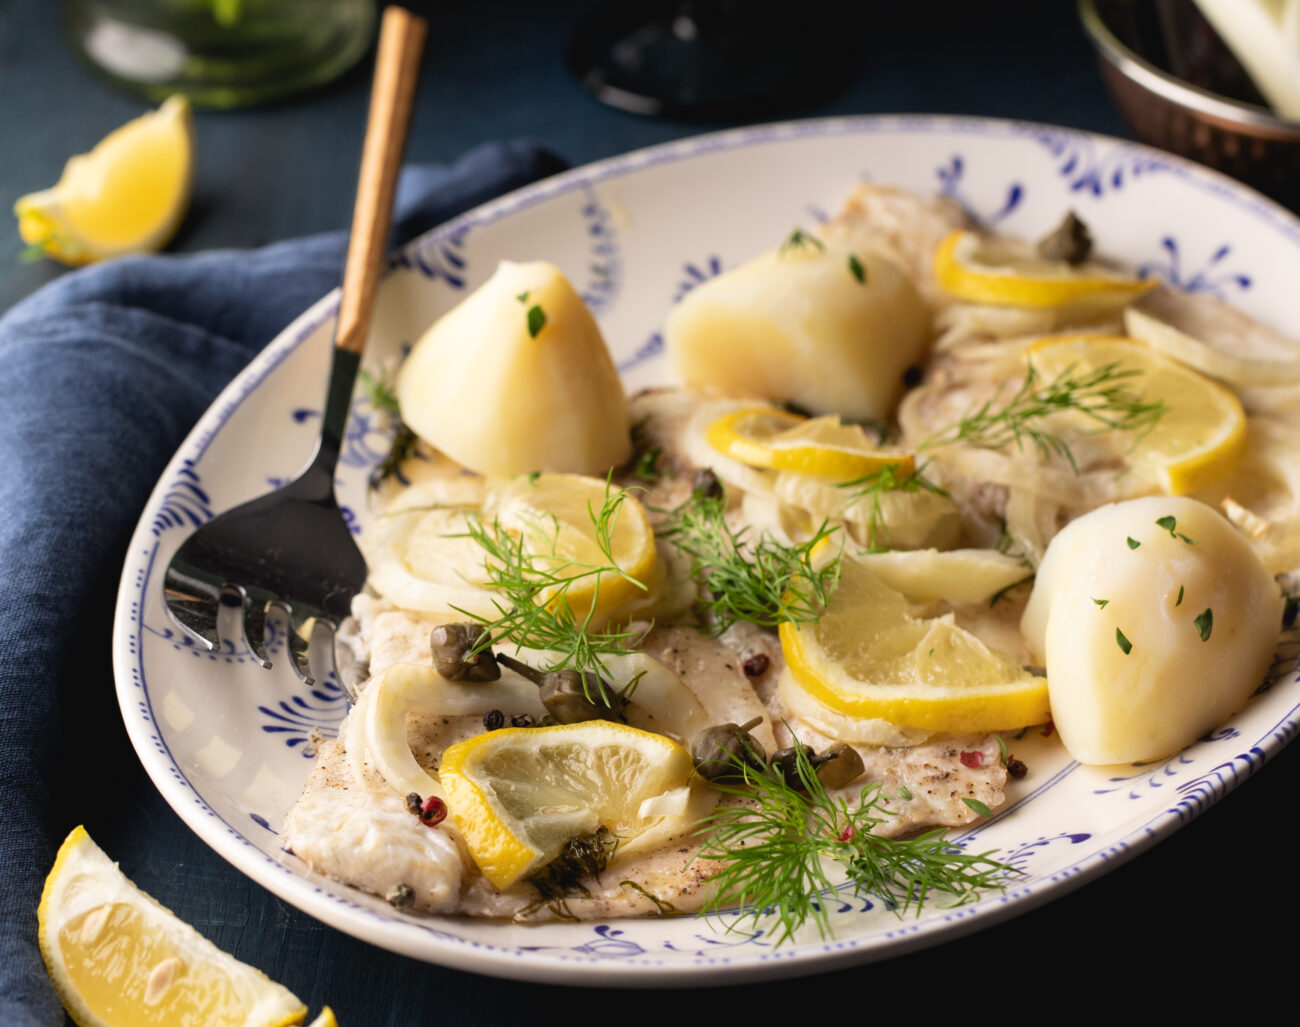 Sea Bass fillets with capers, fennel and dill